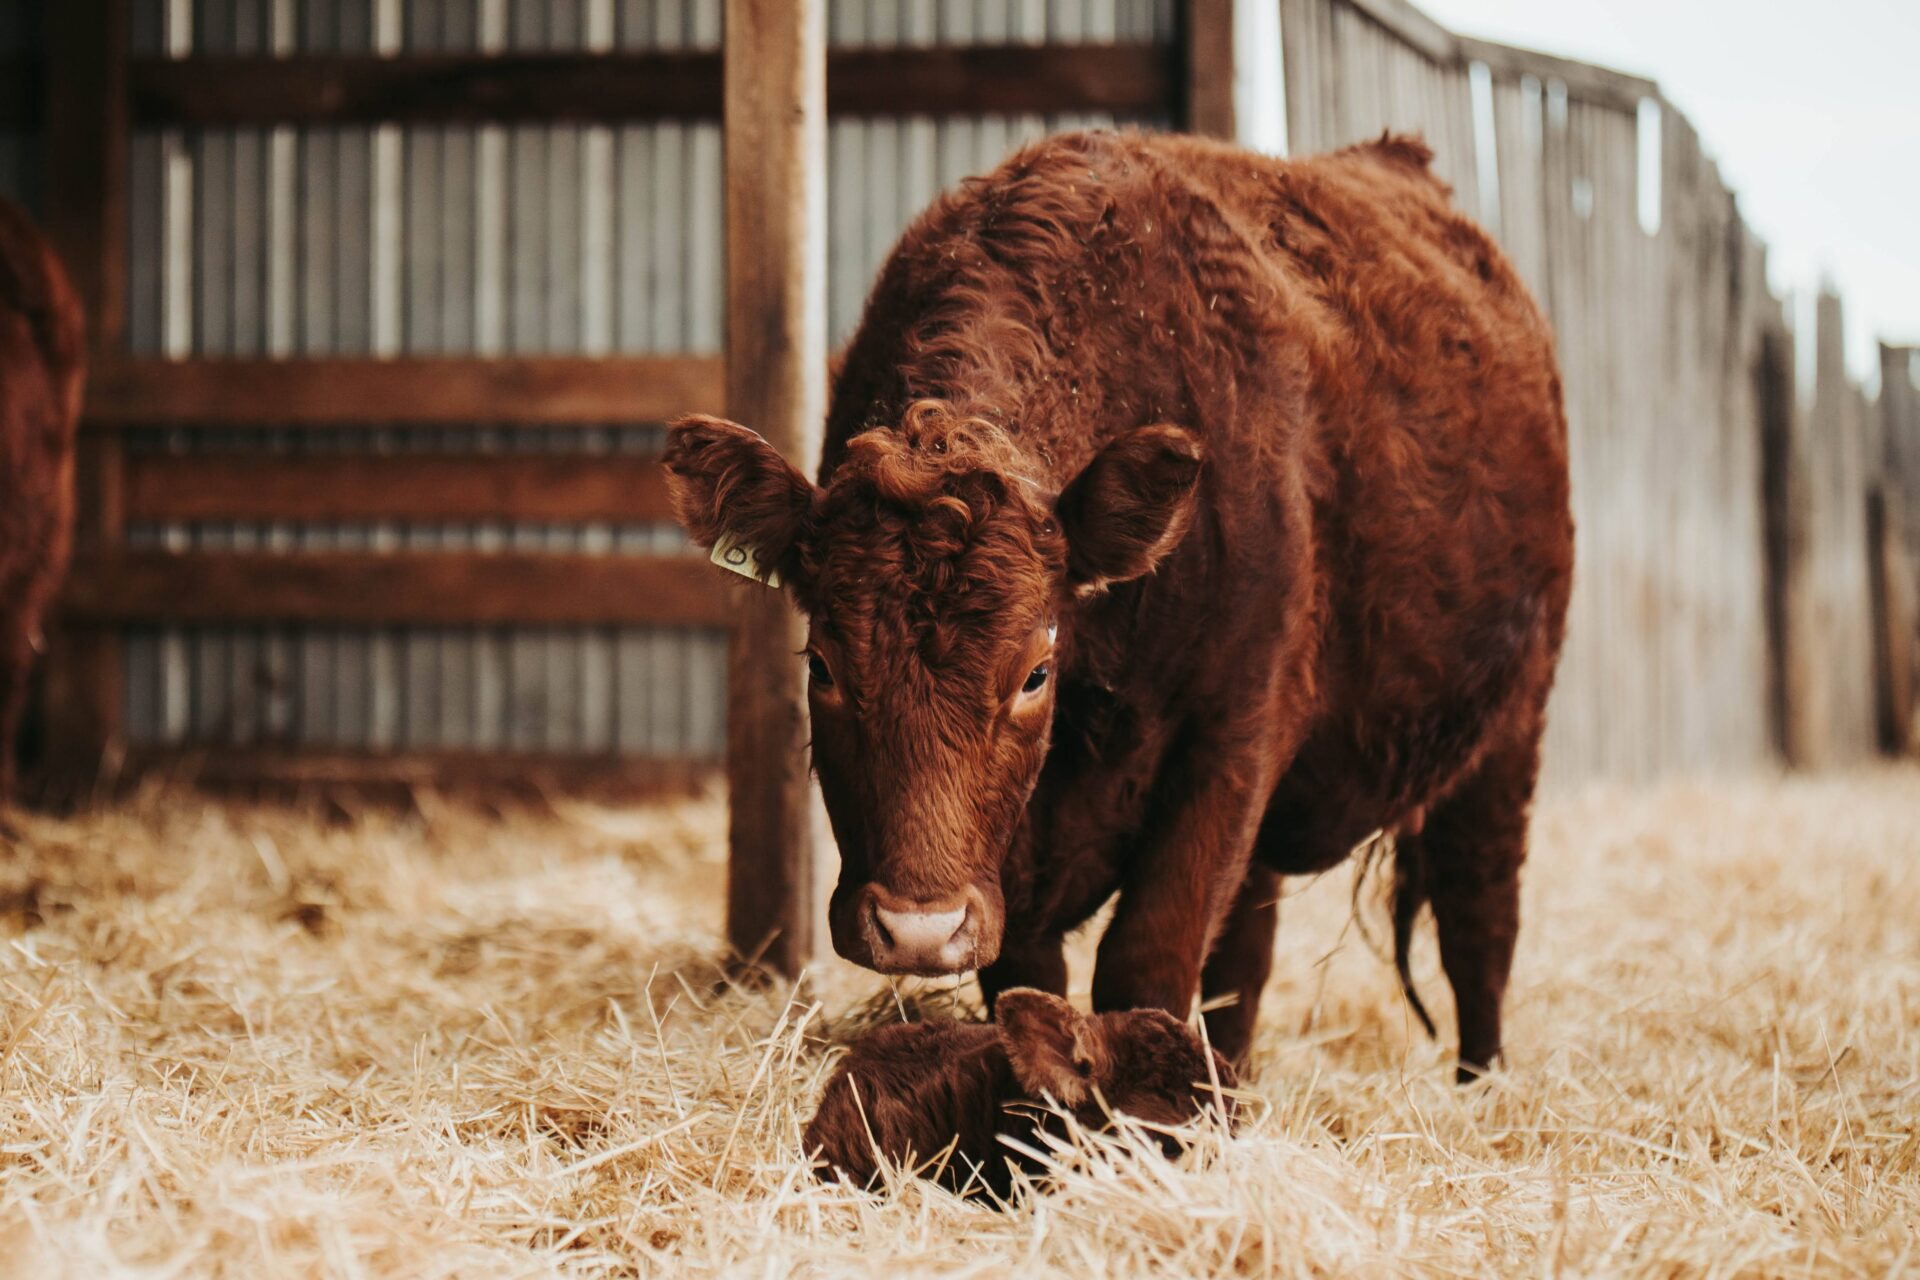 Tips for keeping cattle feeding areas clean